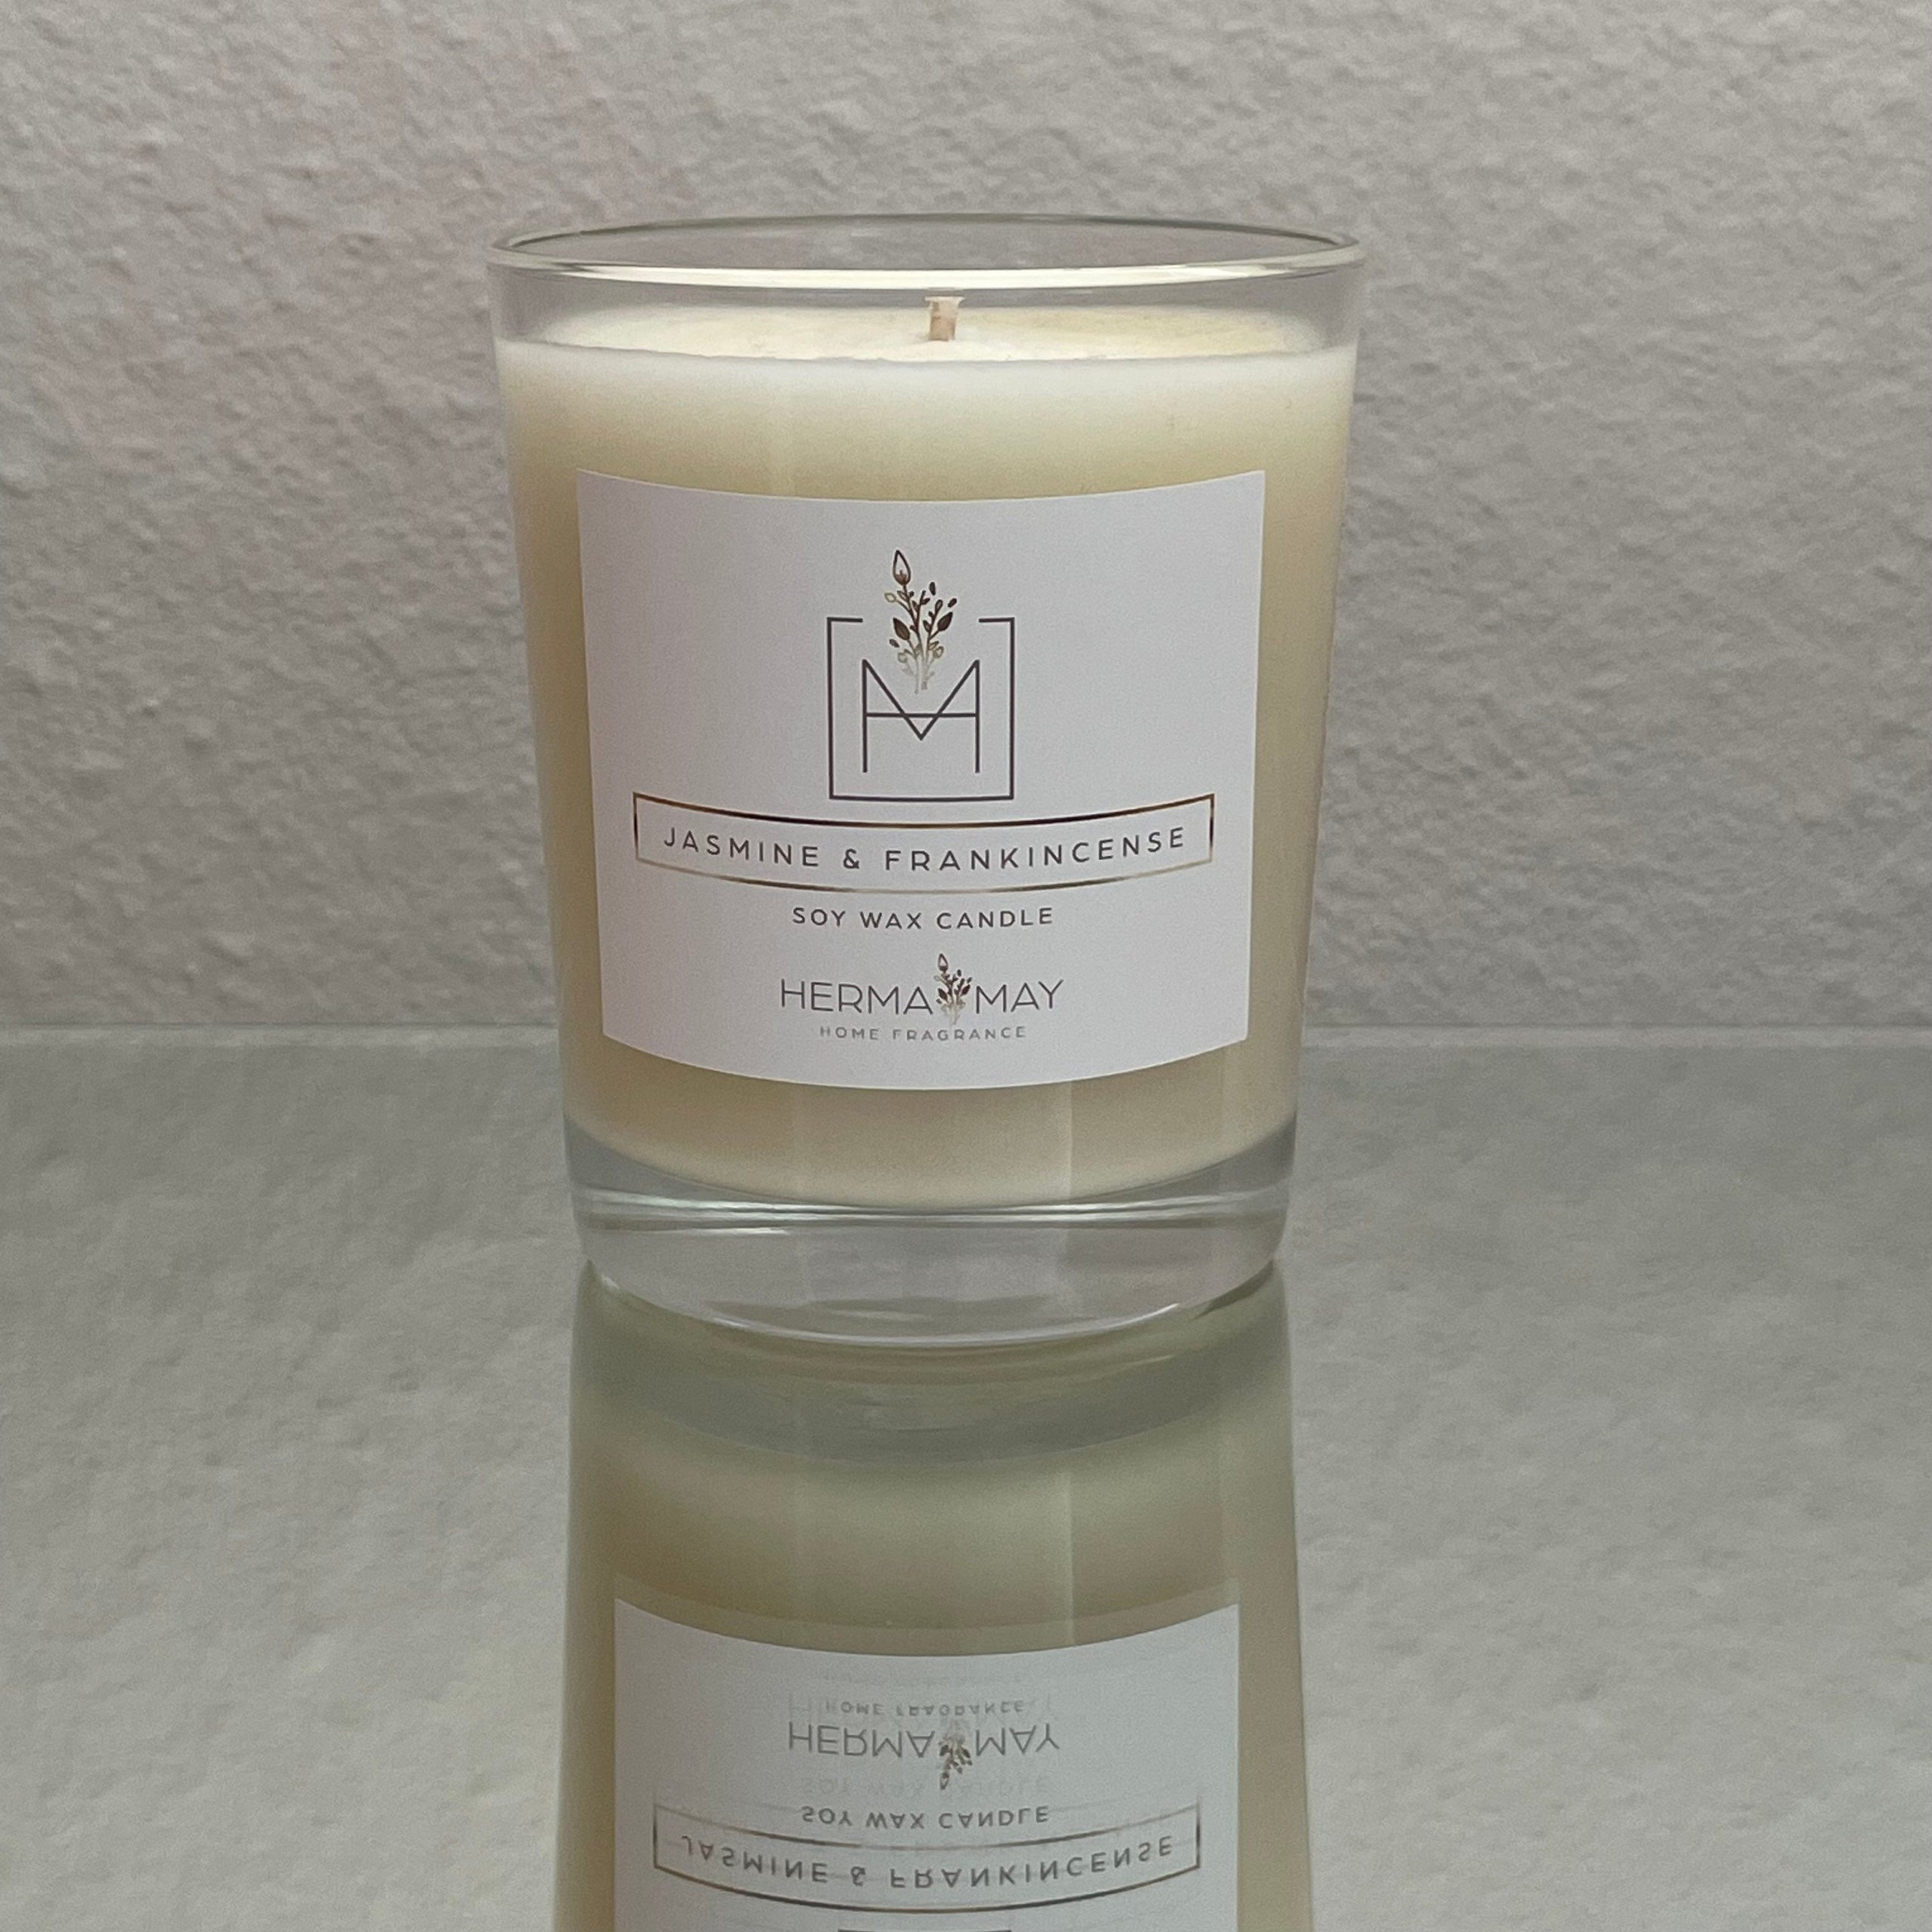 Jasmine & Frankincense Soy Wax Candle